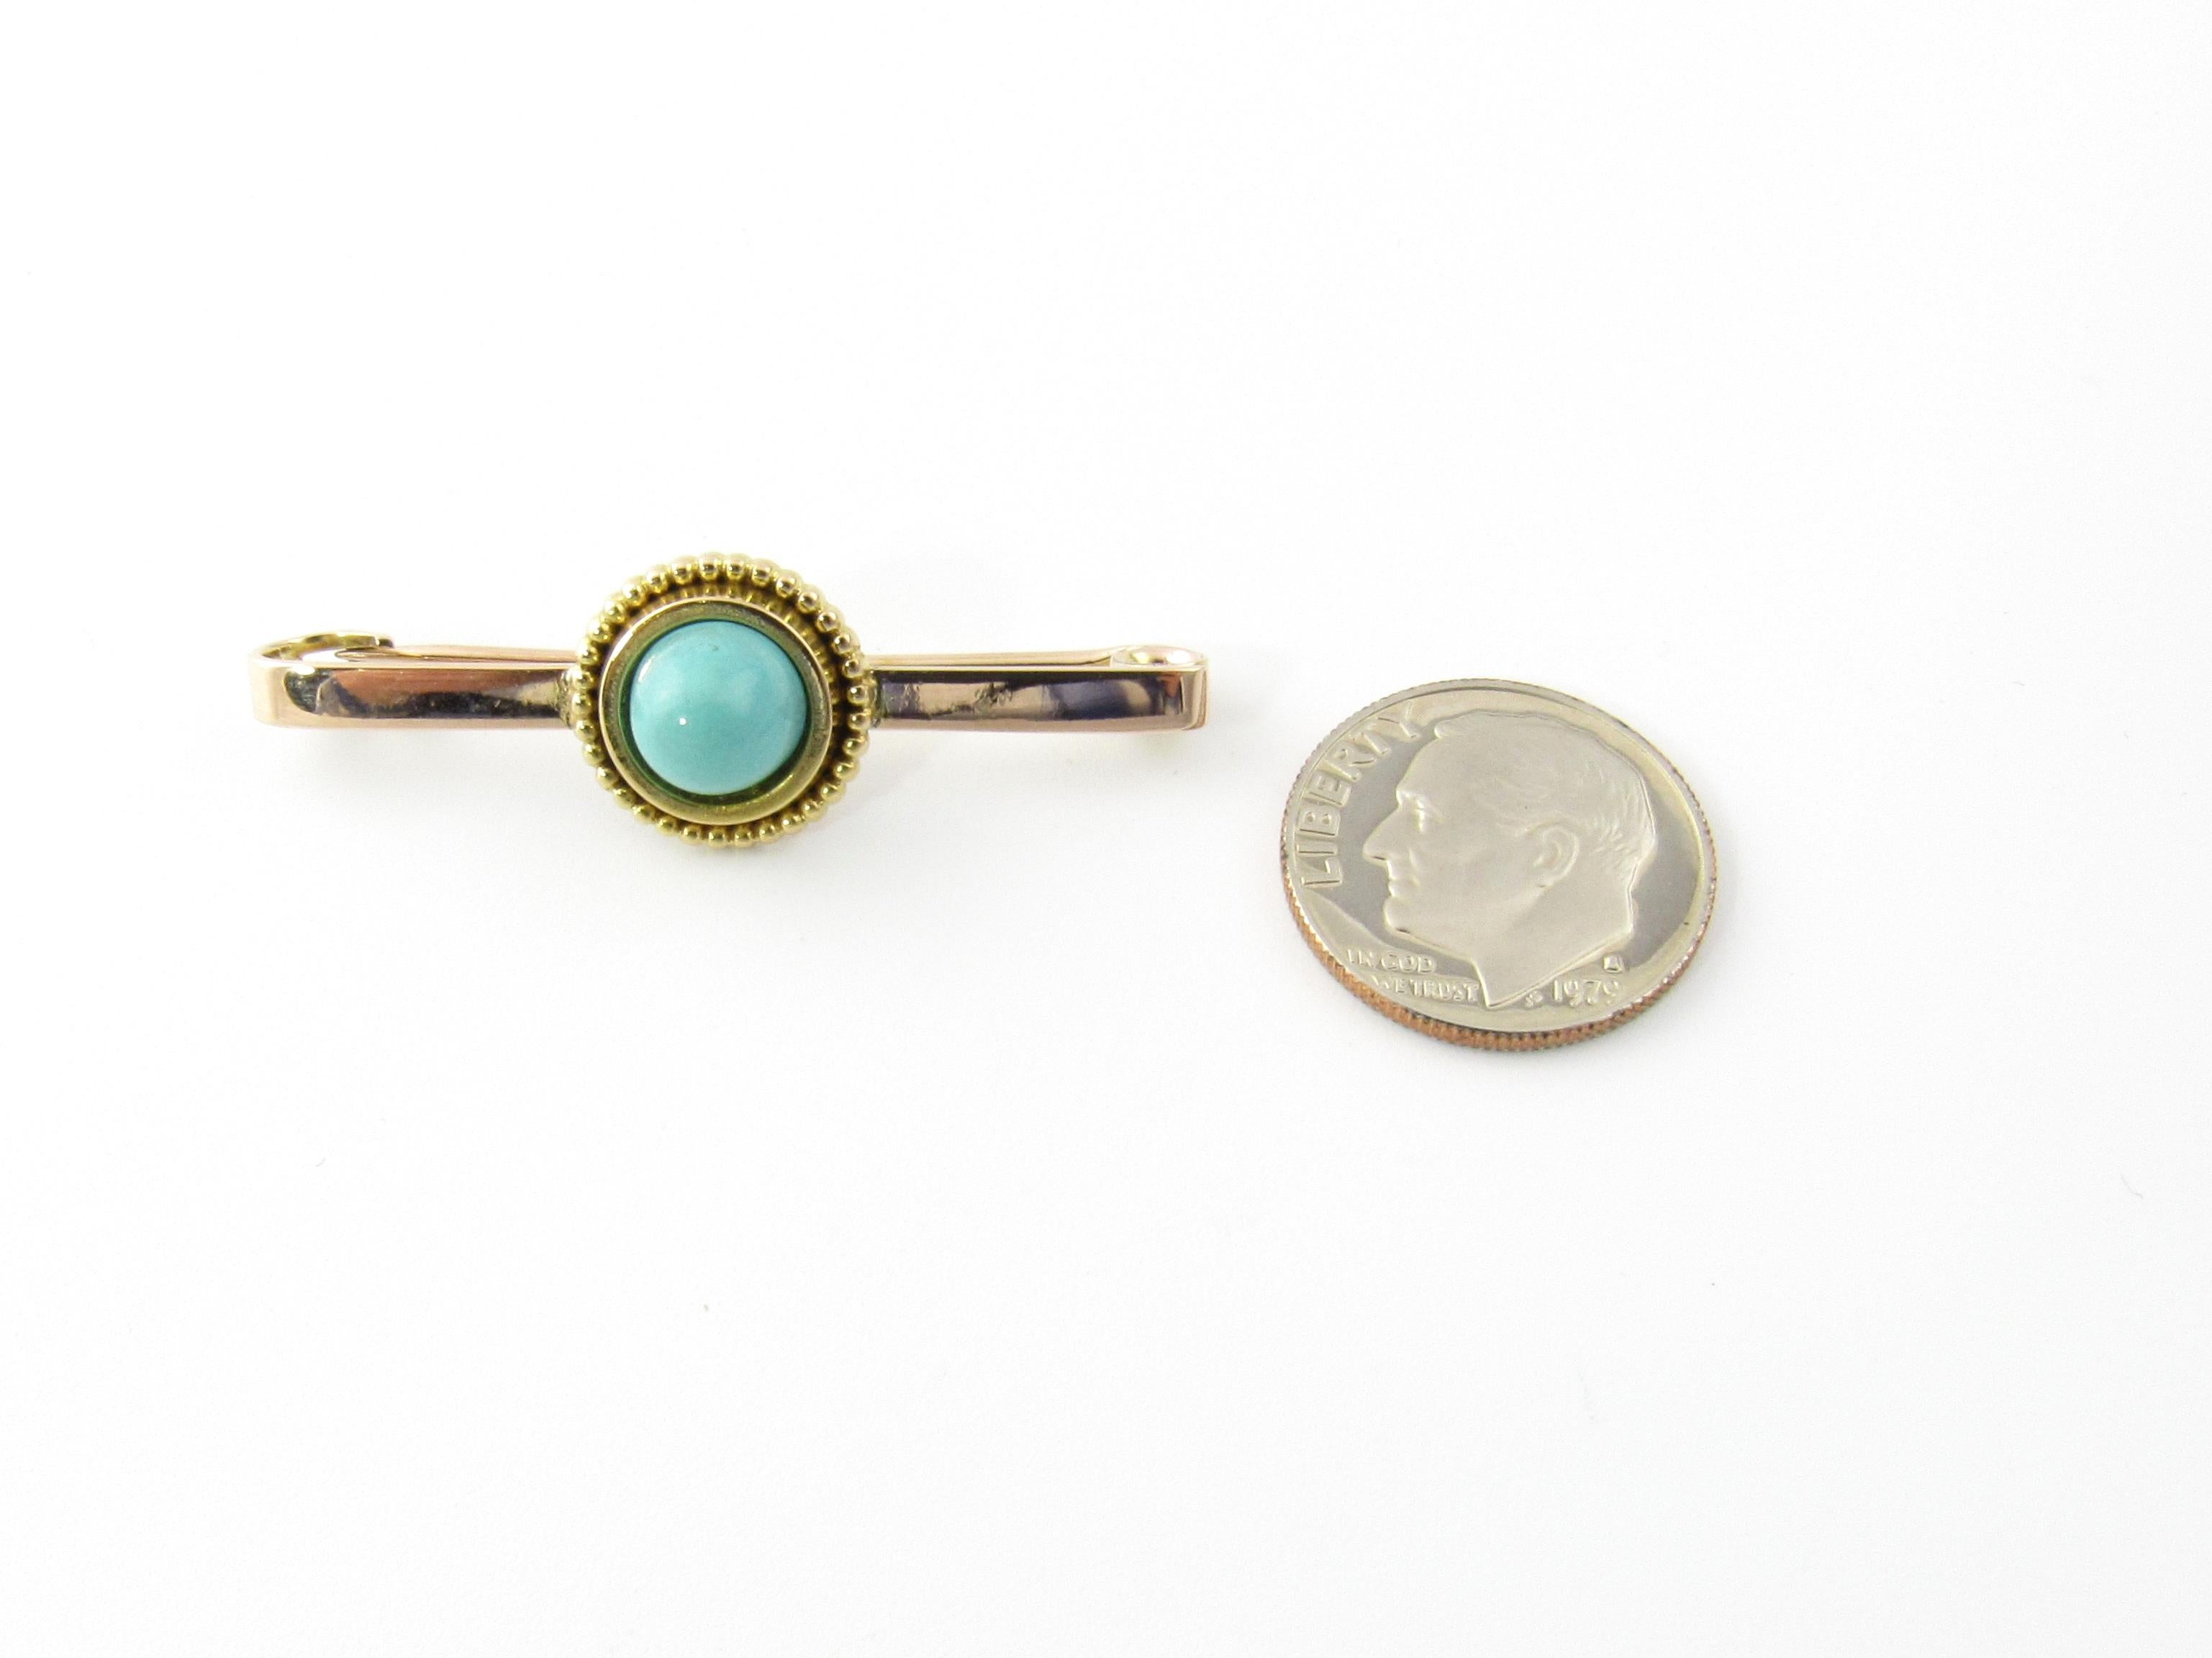 9 Karat Yellow Gold and Turquoise Pin or Pendant 2